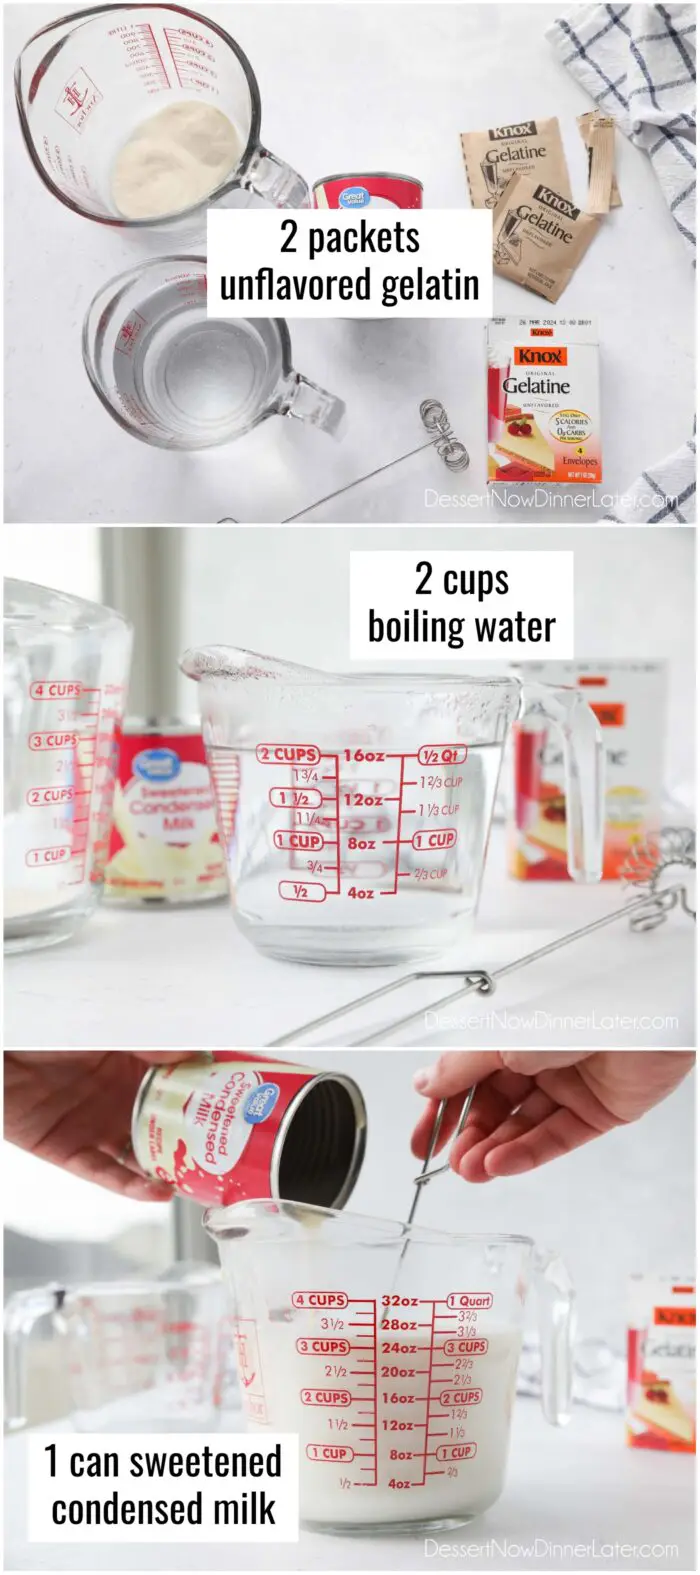 White Layer: Mix 2 packets of unflavored gelatin with 2 cups of boiling water and 1 can of sweetened condensed milk.